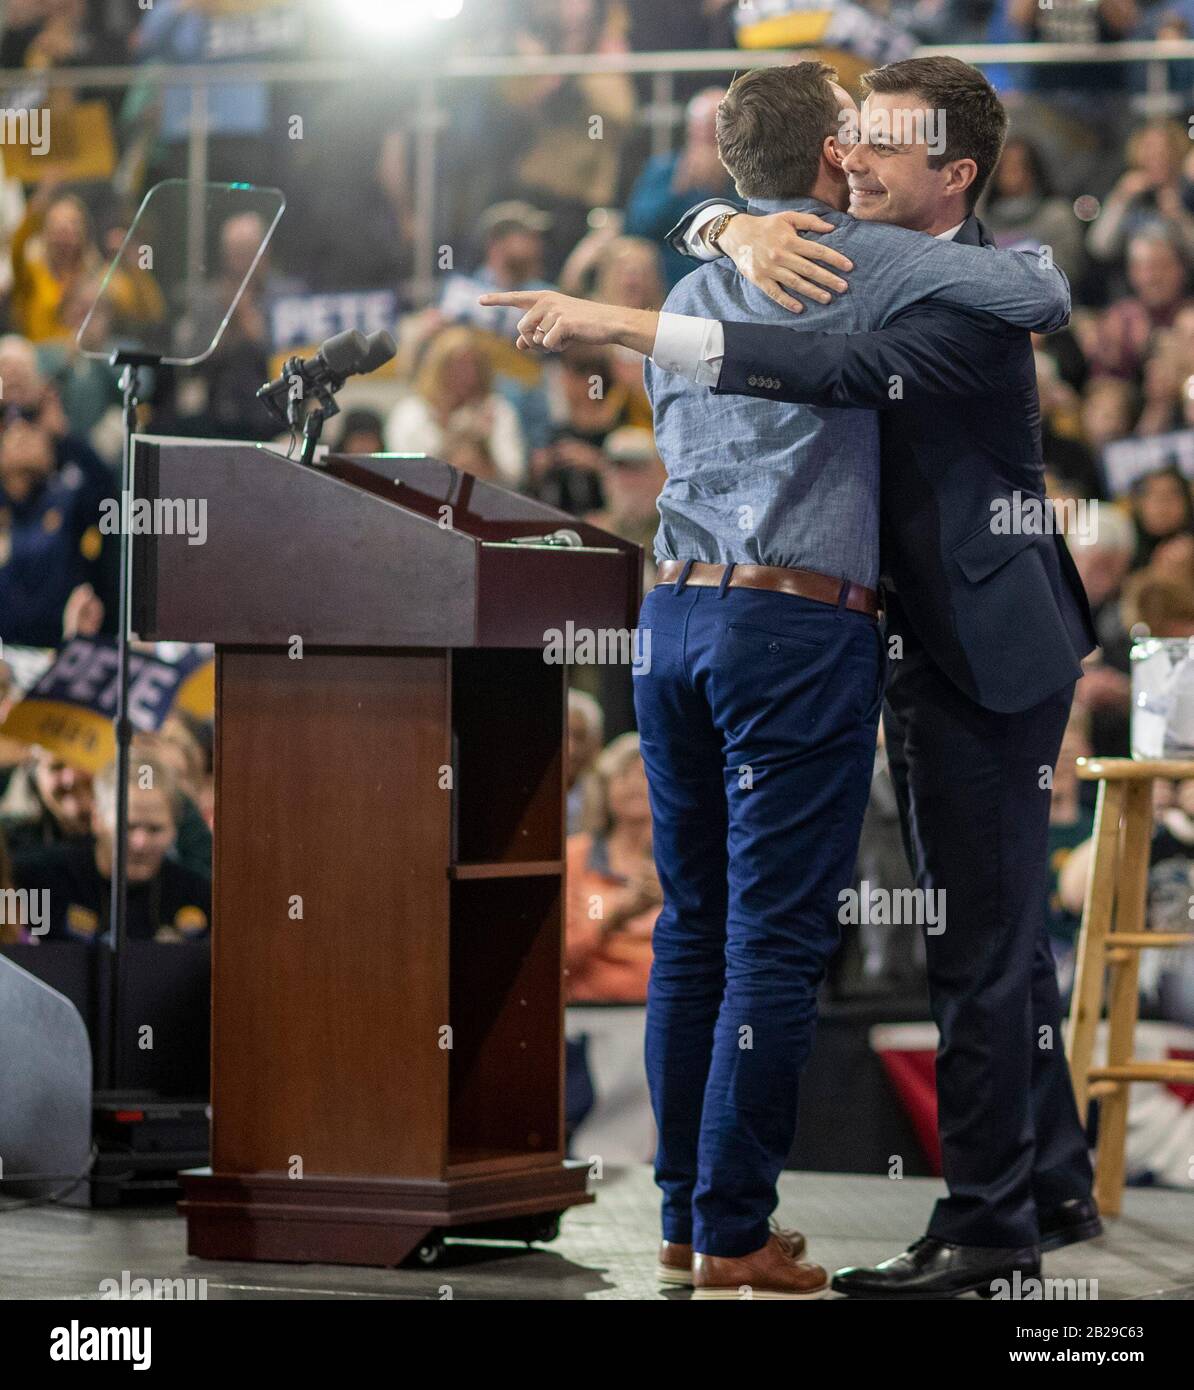 Raleigh, North Carolina, USA. 29th Feb 2020. Pete Buttigieg acknowledges a well-wisher as he is hugged by husband Chasten Buttigieg, during a campaign rally in Raleigh, N.C., Saturday, Feb. 29, 2020. Buttigieg, who finished in fourth place this evening in neighboring South Carolina, is campaigning in North Carolina and other states in advance of the big Super Tuesday matchups on March 3, which might serve to narrow the democratic field immensely. Credit: Sipa USA/Alamy Live News Stock Photo